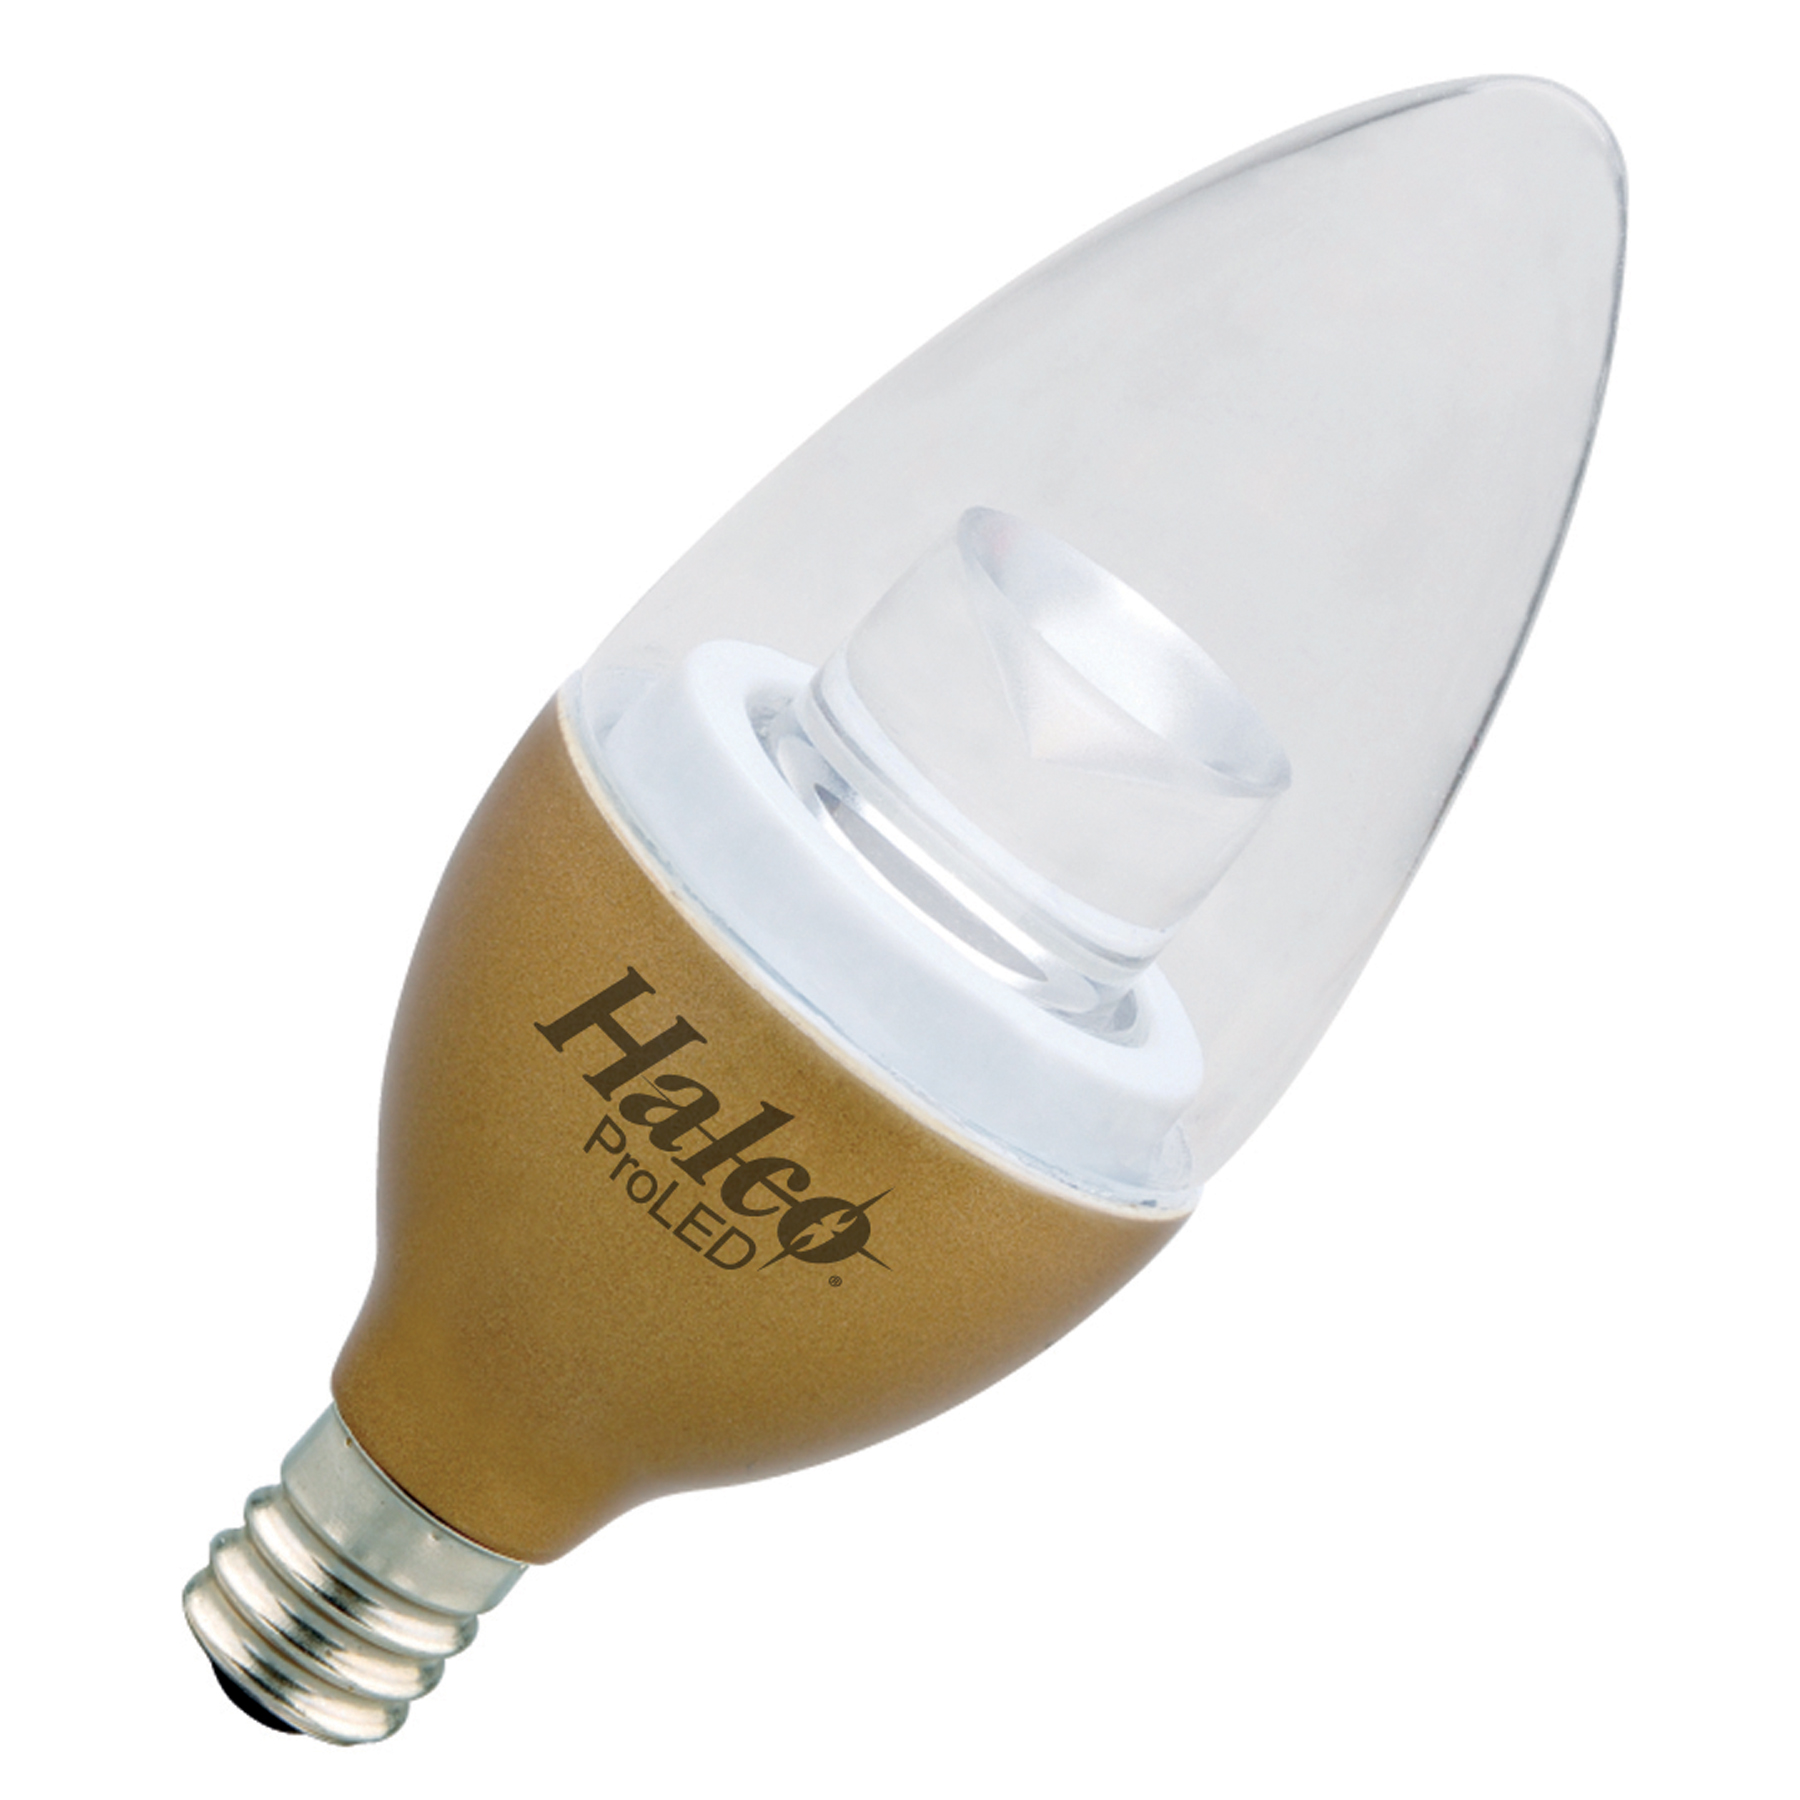 LED B11 BRASS 3W 2700K DIMMABLE E12 PROLED